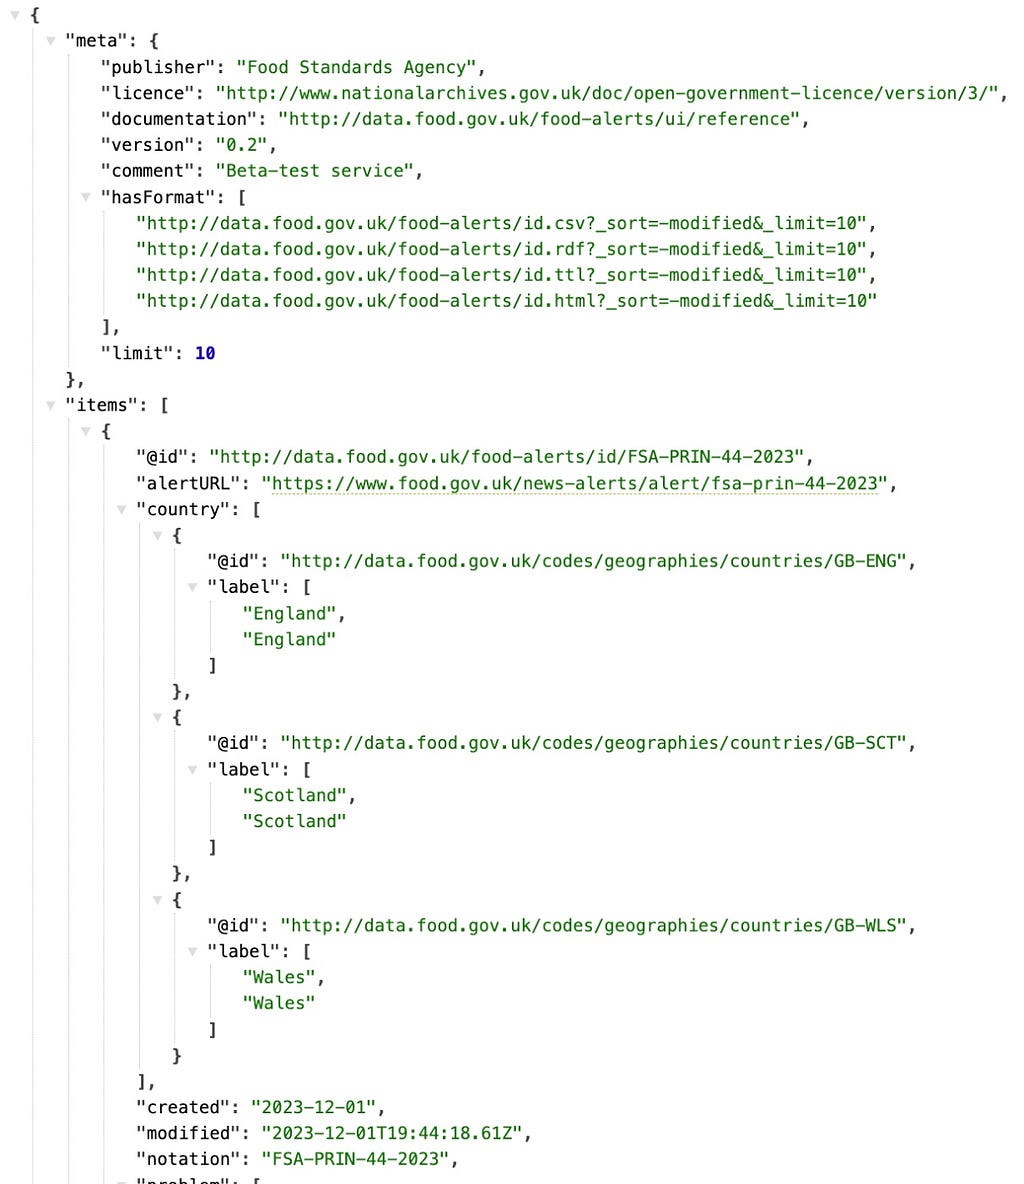 Illustrative example of json response for the API query used in this example